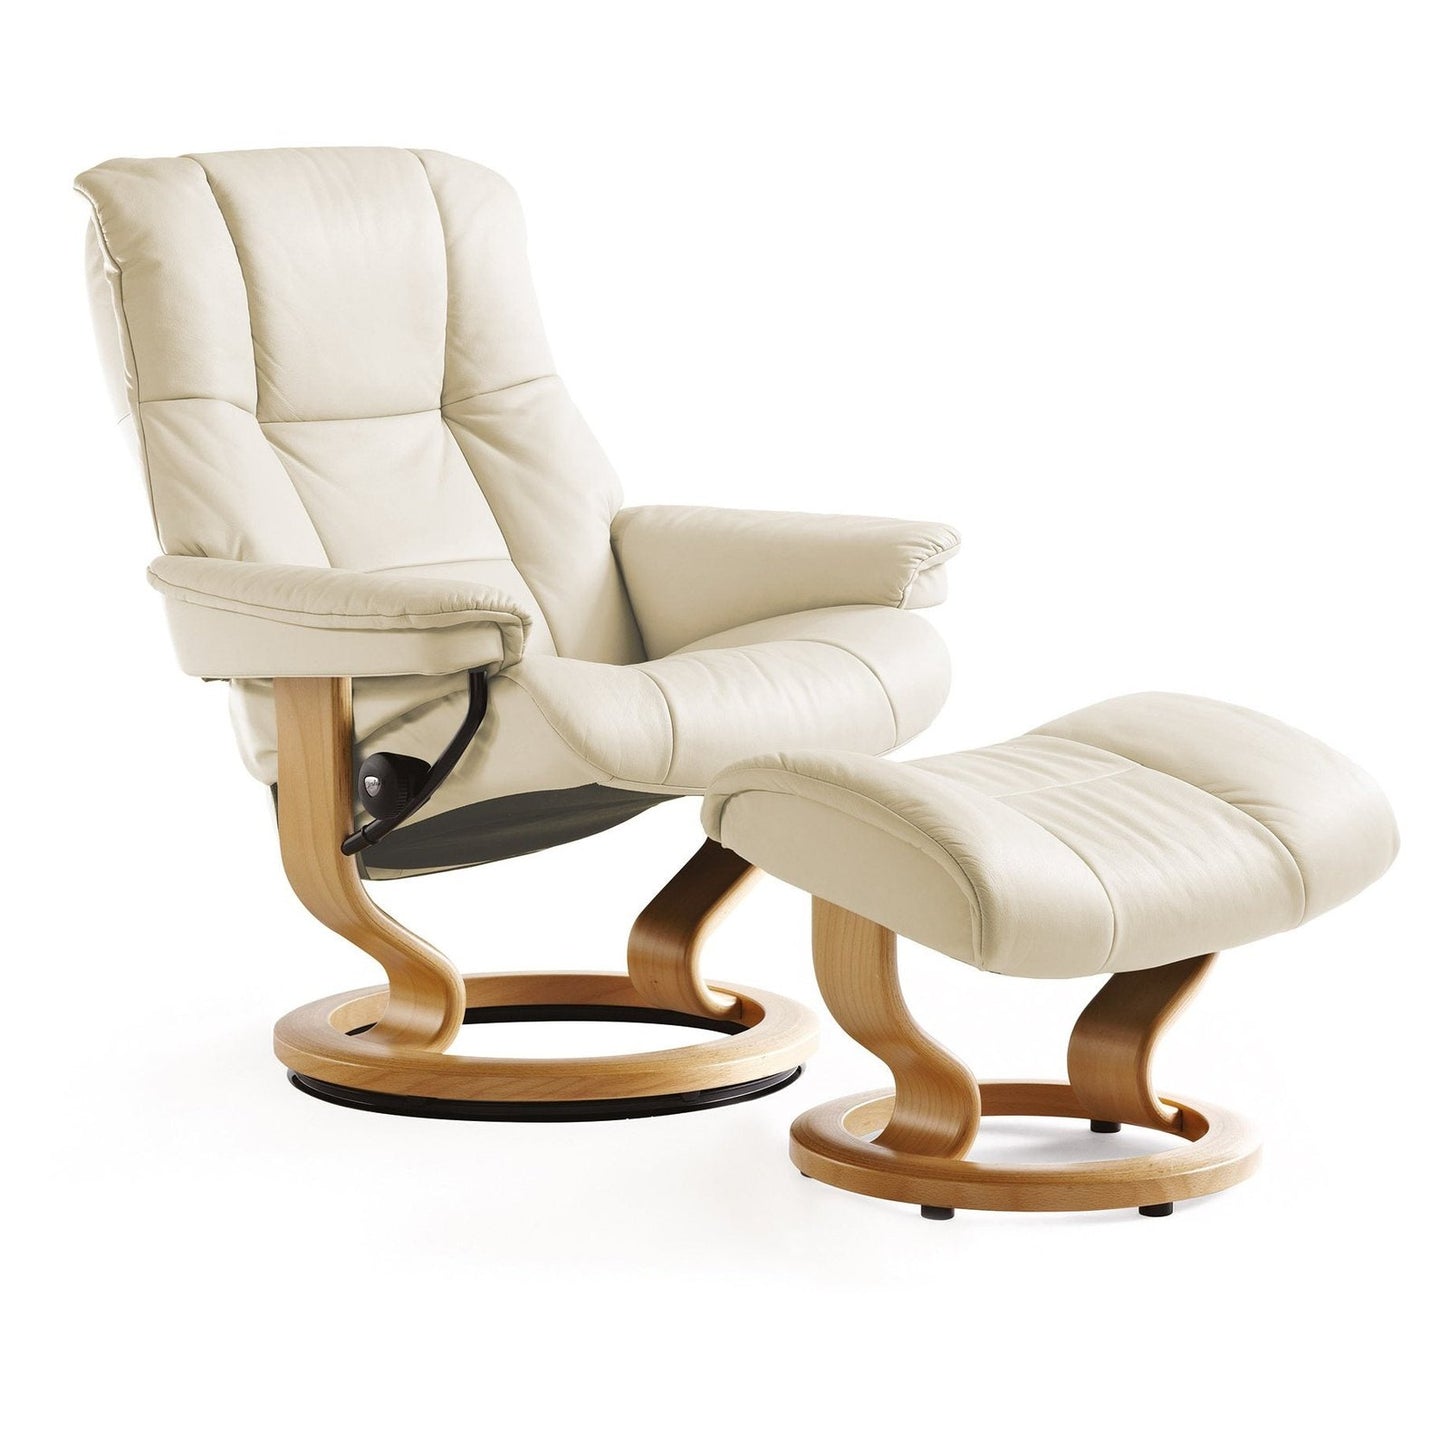 Stressless Mayfair Small Classic Recliner with Stool - Hunter Furnishing